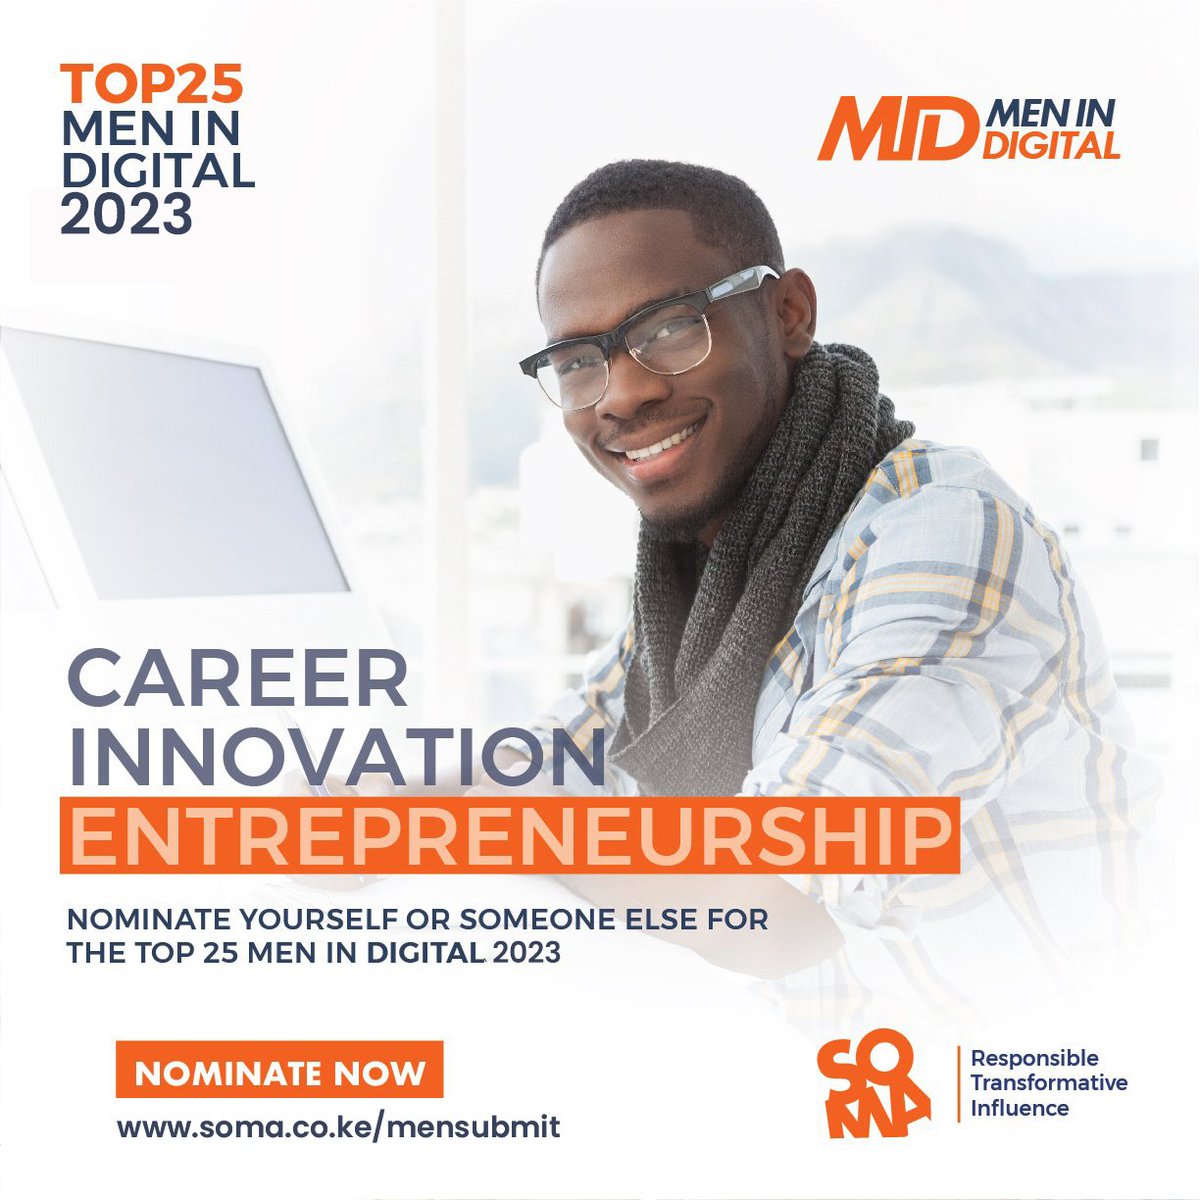 Nominations are now open for the Top 25 Men in Digital 2023 . NOMINATE: soma.co.ke/mensubmit/